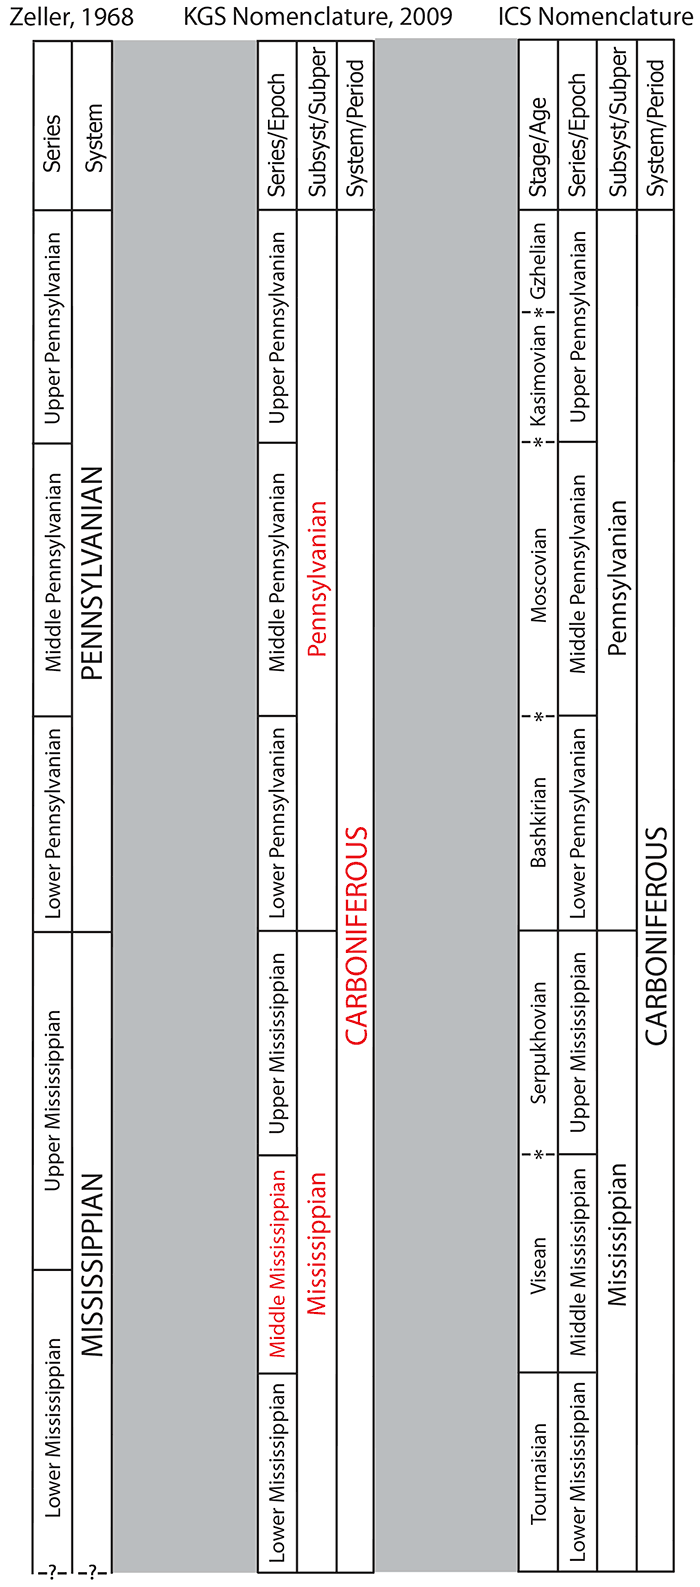 Figure compares older stratigraphic column to a new column with nomenclature changes.